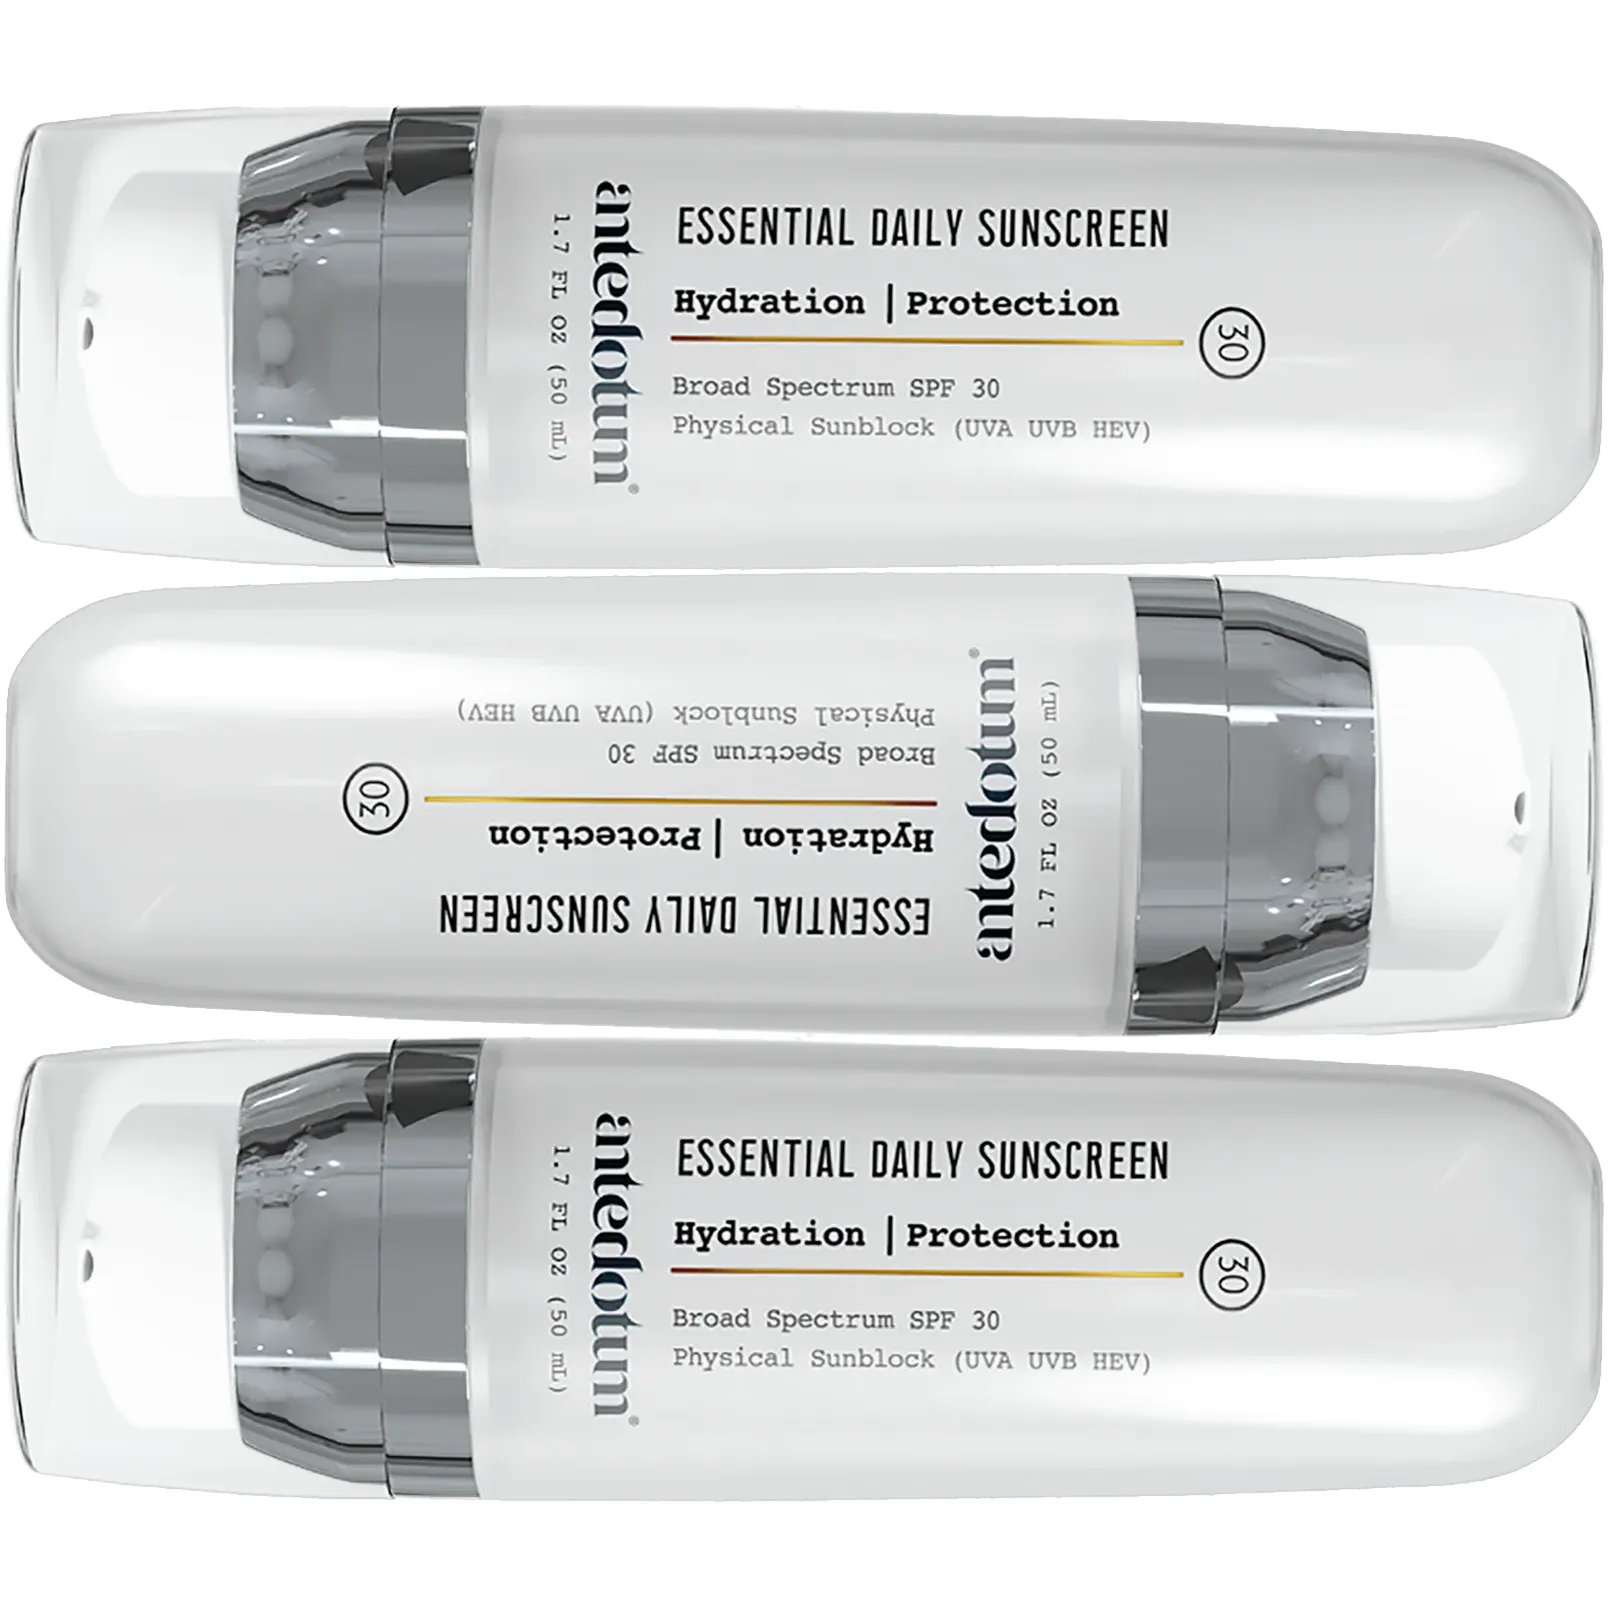 Free Antedotum's Essential Daily Sunscreen